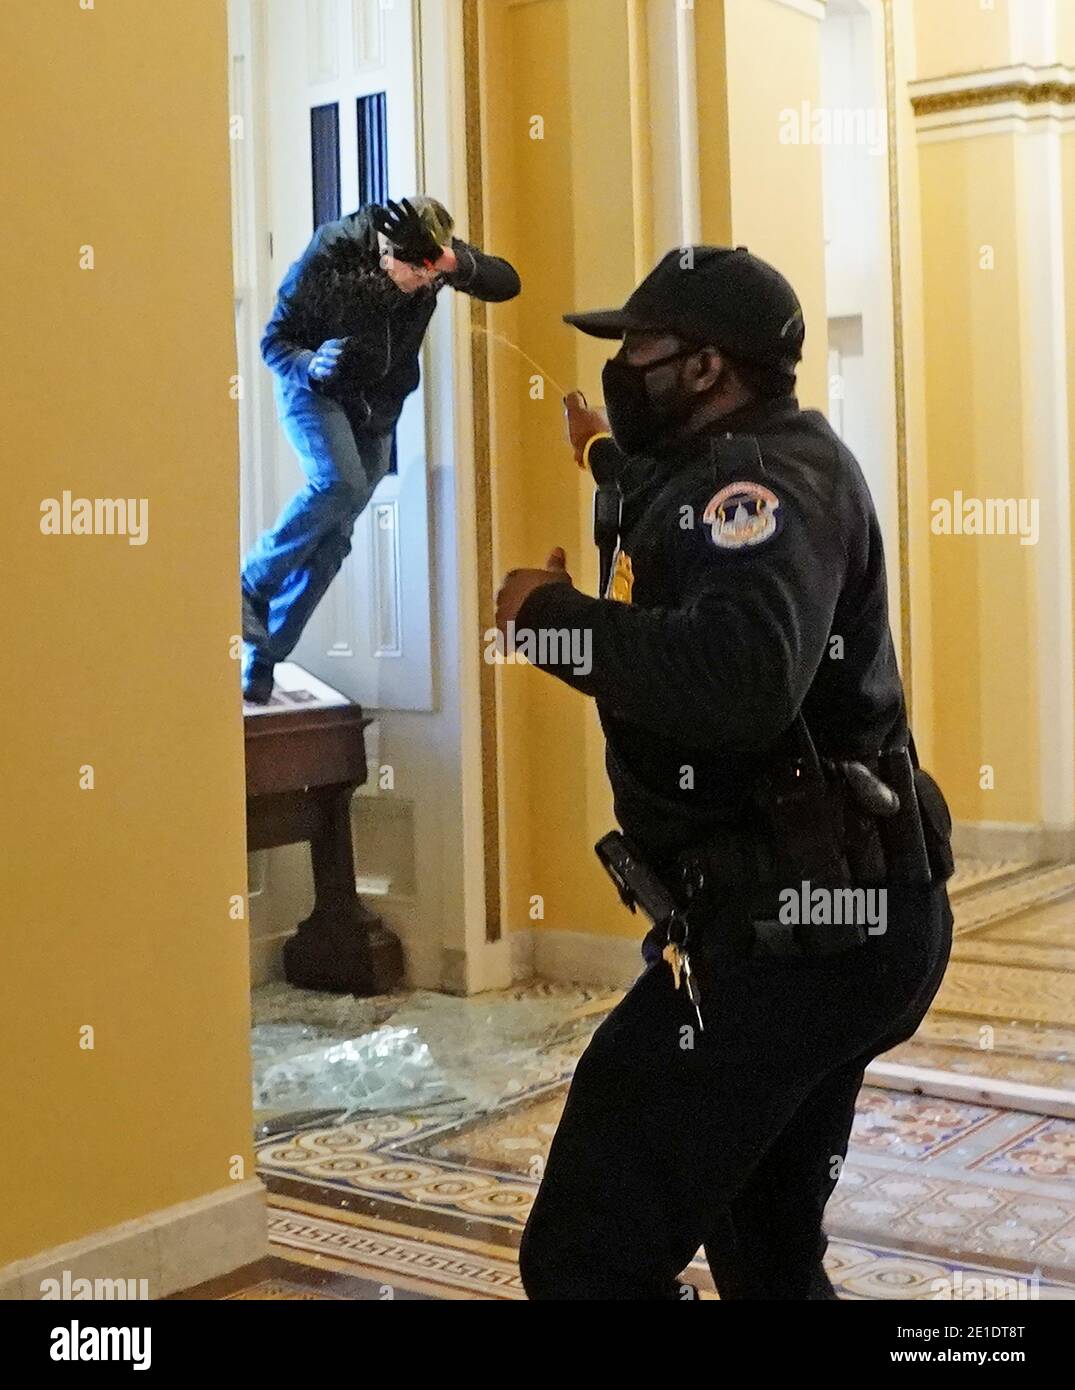 Washington, United States. 06th Jan, 2021. A U.S. Capitol police officer shoots pepper spray at a protestor attempting to enter the Capitol building during a joint session of Congress in Washington, DC on Wednesday, January 6, 2021. Photo by Kevin Dietsch/UPI Credit: UPI/Alamy Live News Stock Photo